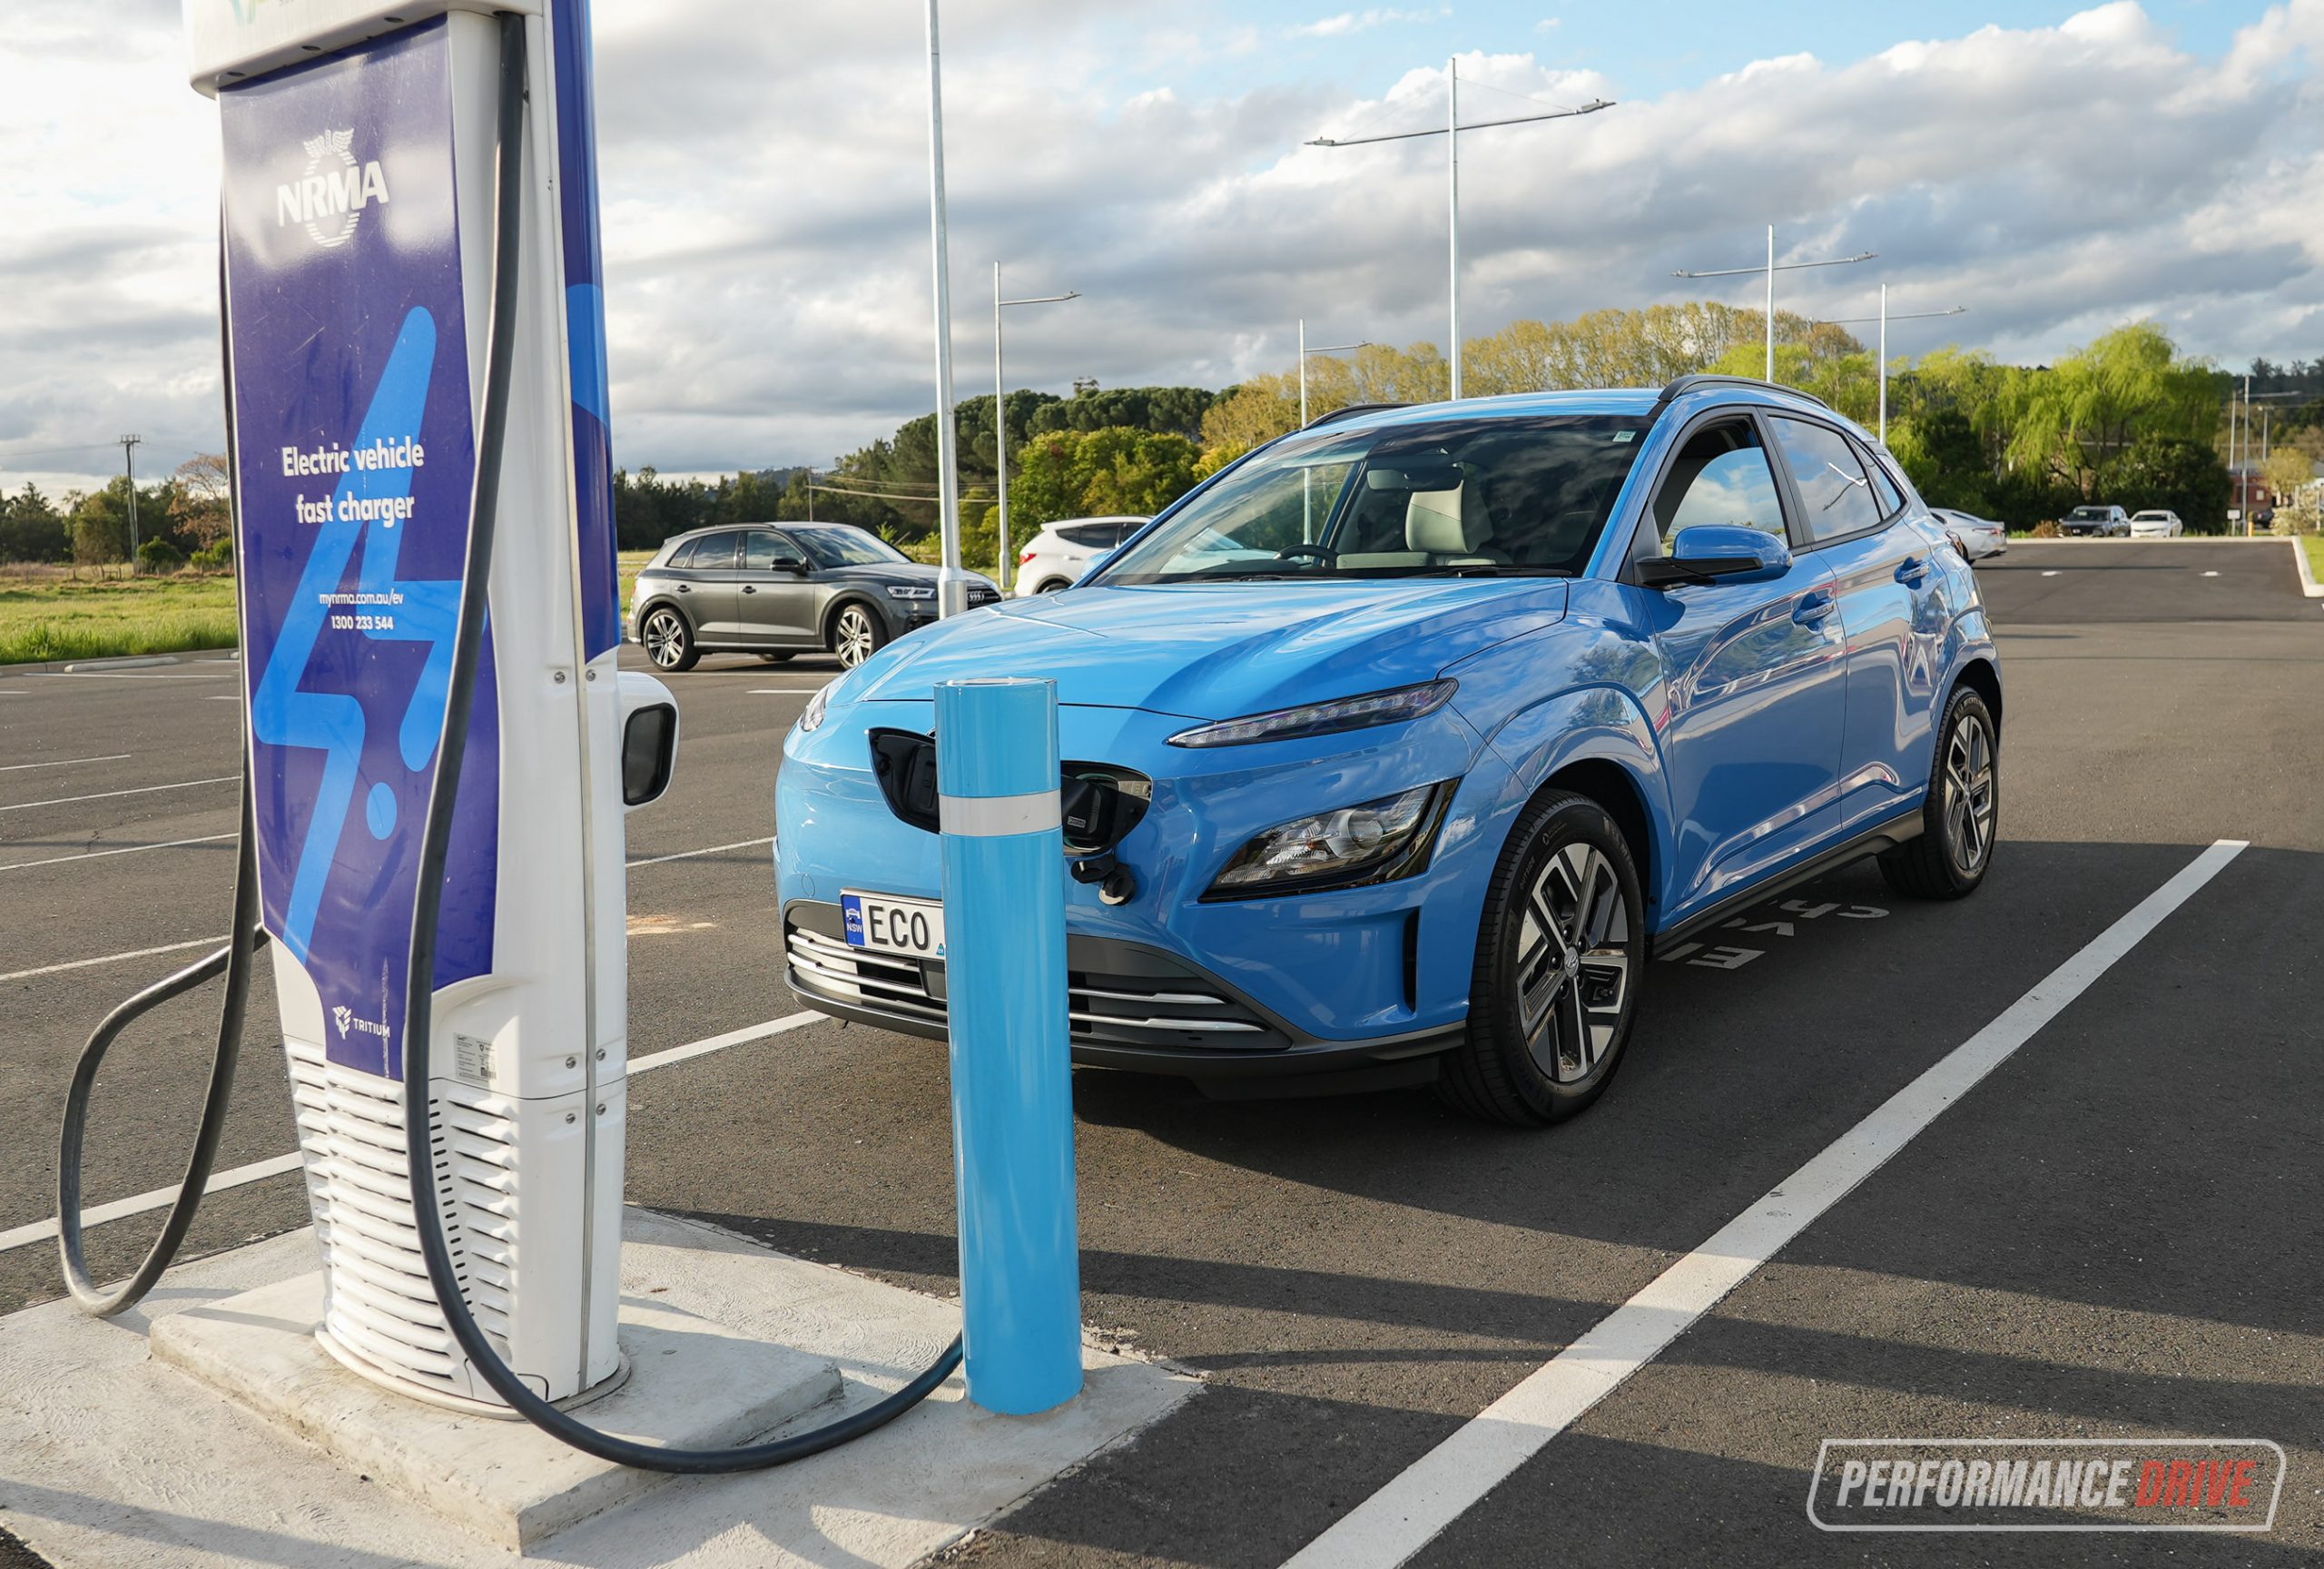 FCAI supports NSW investment in electric vehicle infrastructure